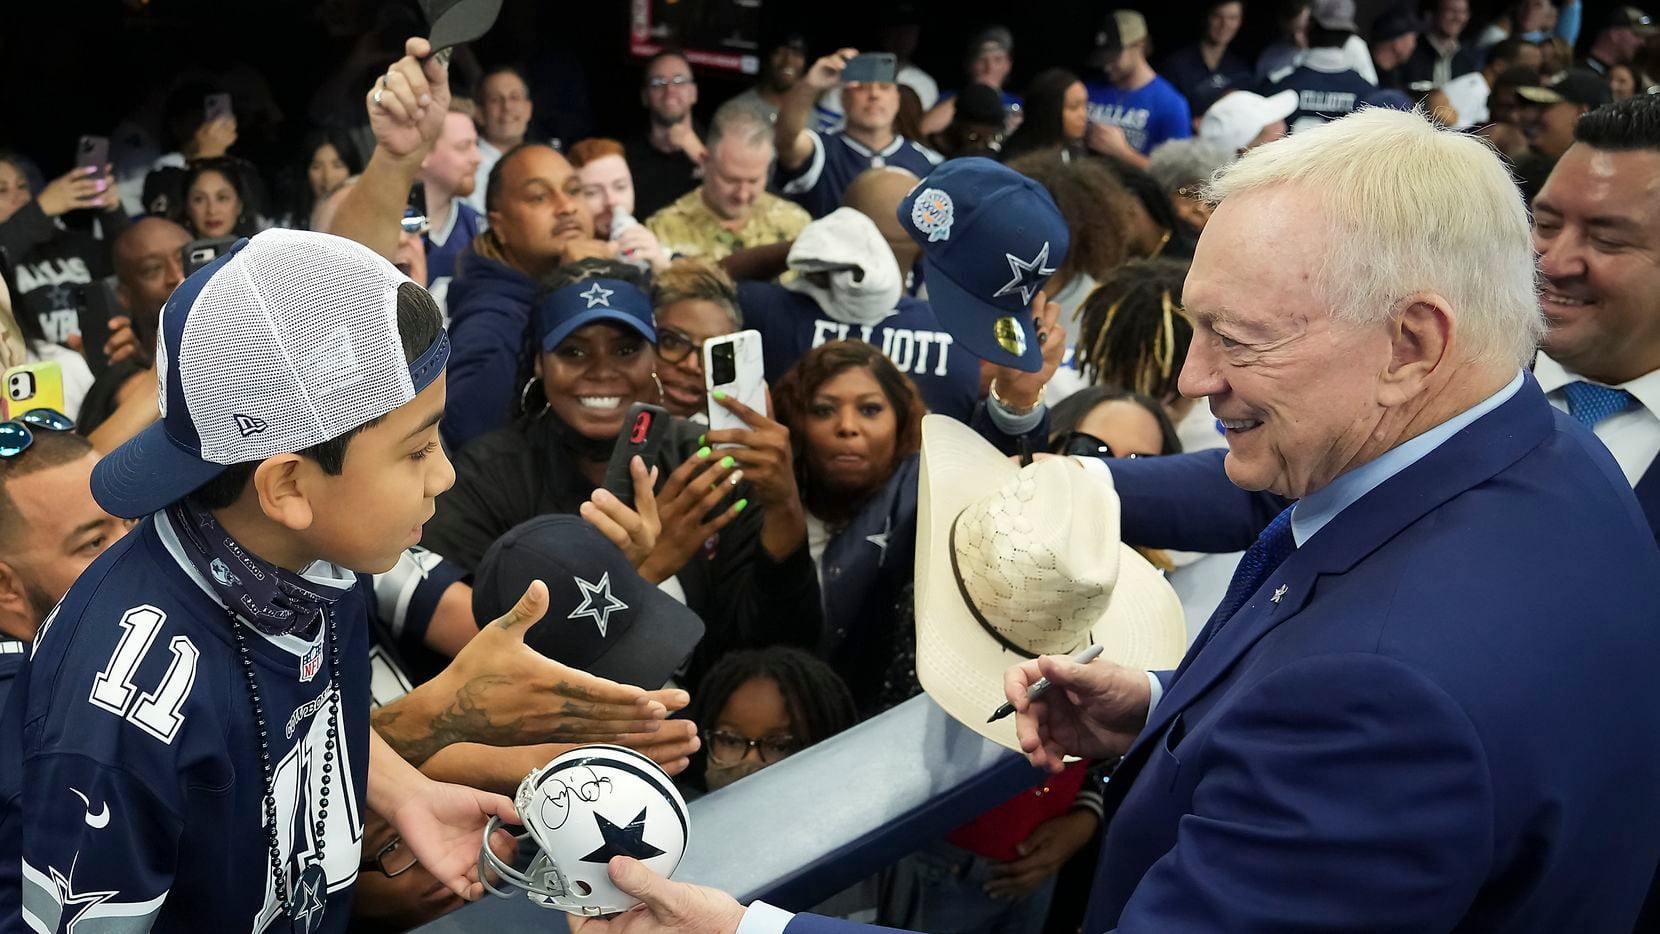 Dallas Cowboys owner and general manager Jerry Jones signs autographs for fans before an NFL...